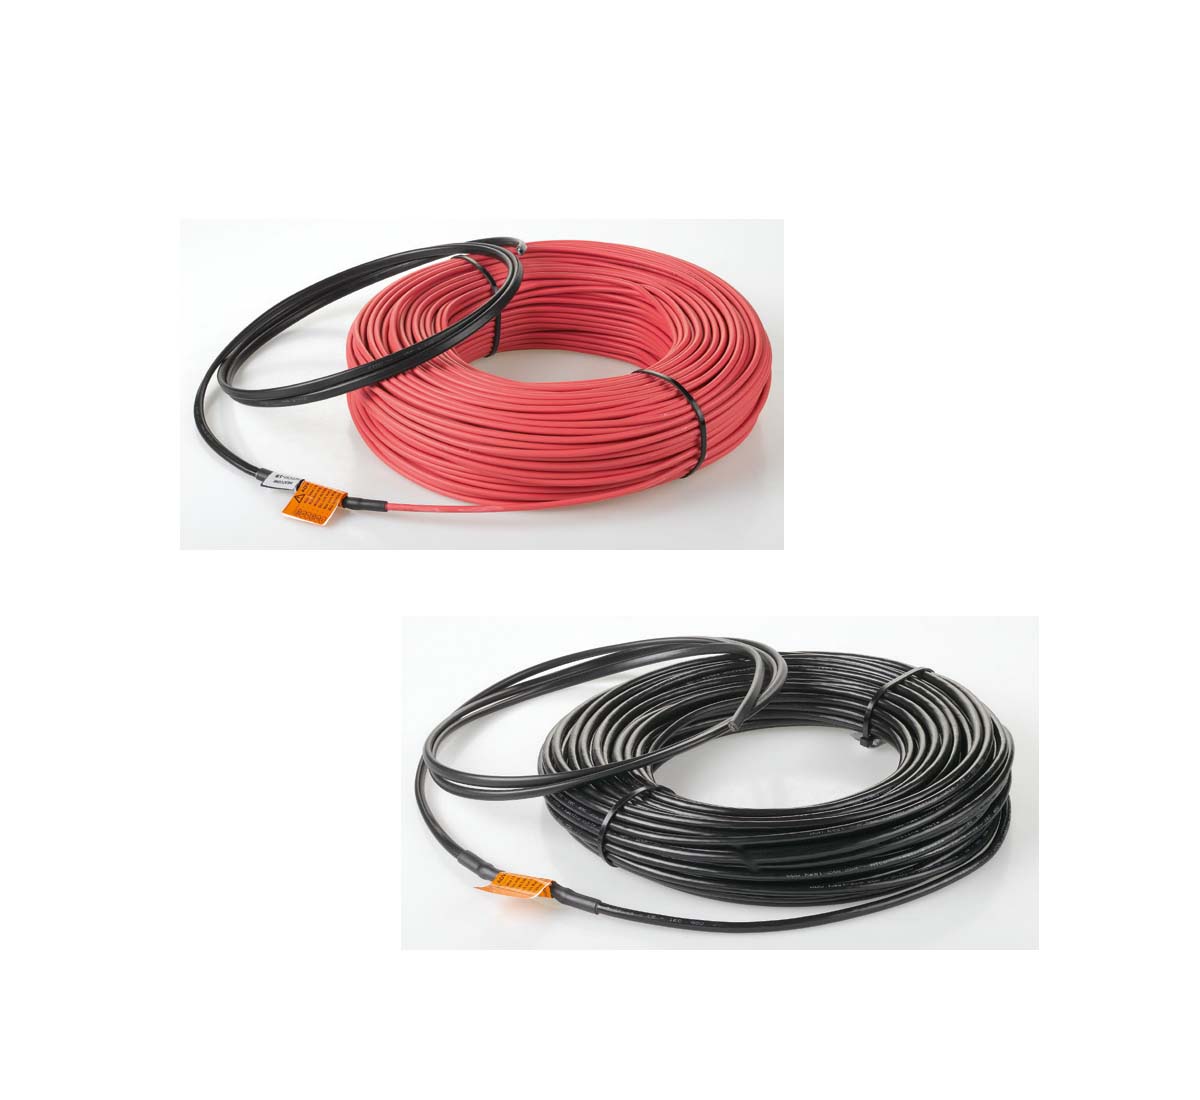 A picture of two self regulating heating cables